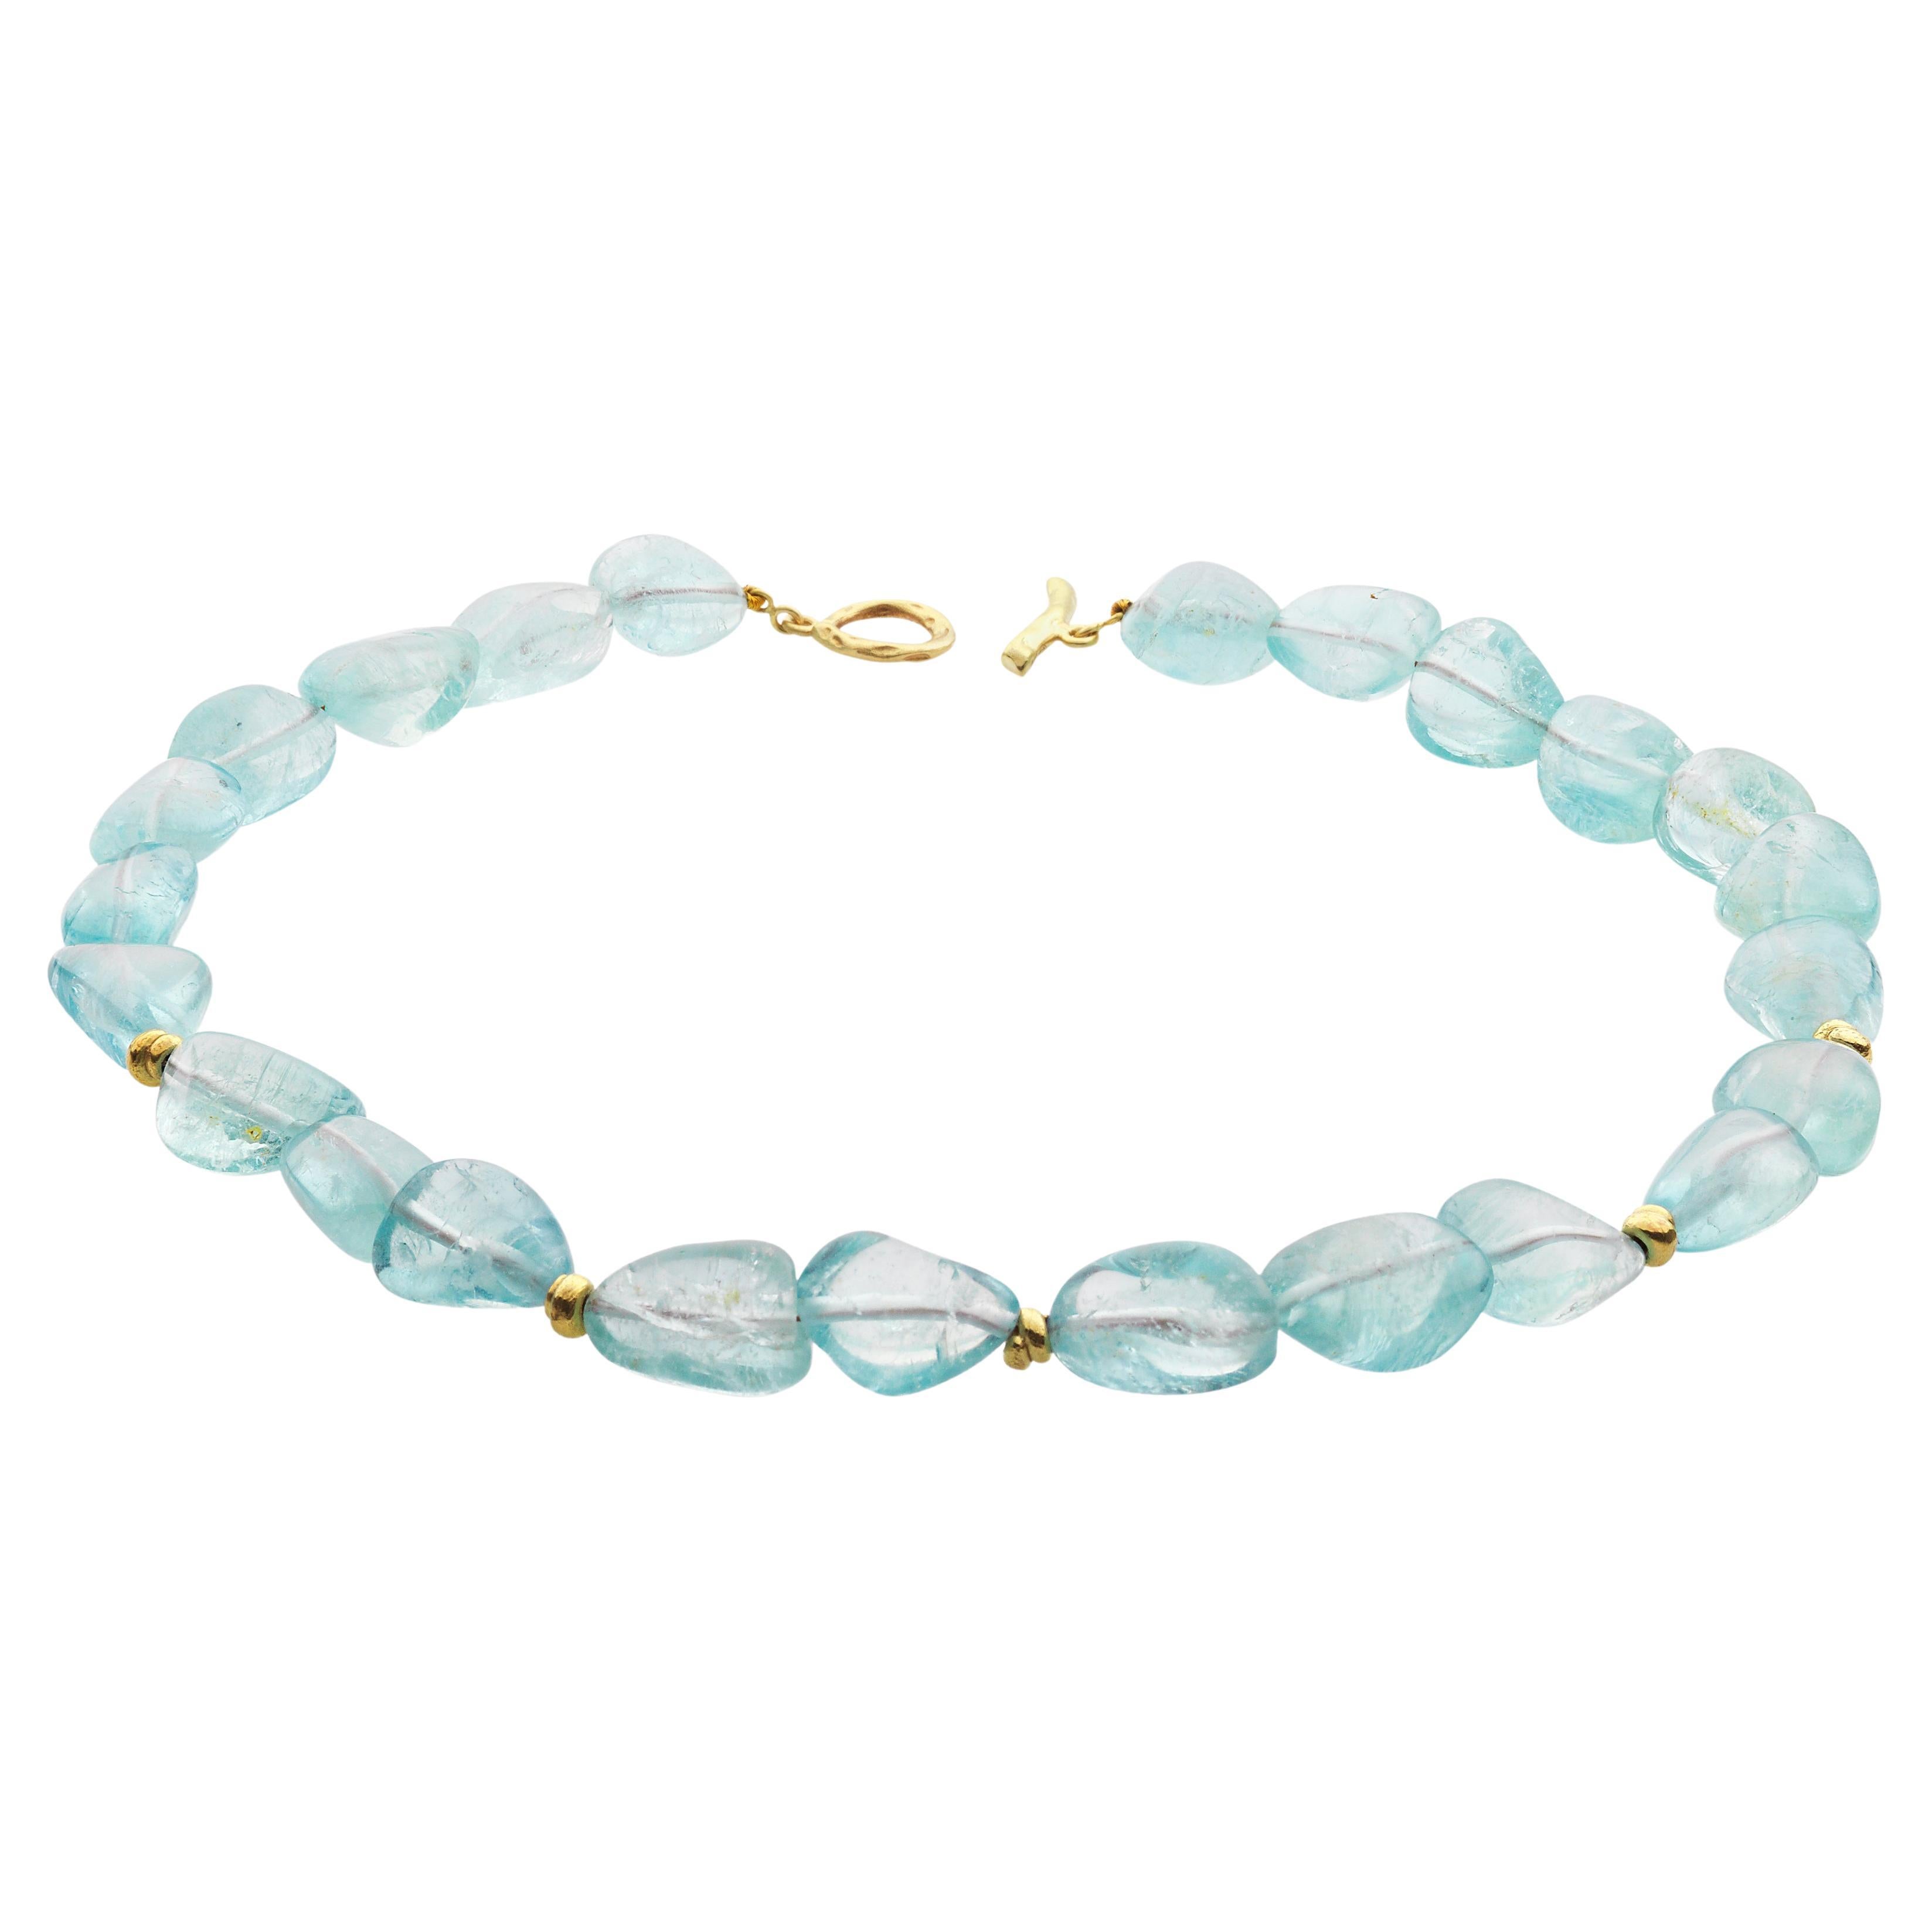 Short Aquamarine Beaded Necklace with 18k Gold Beads and Toggle Clasp